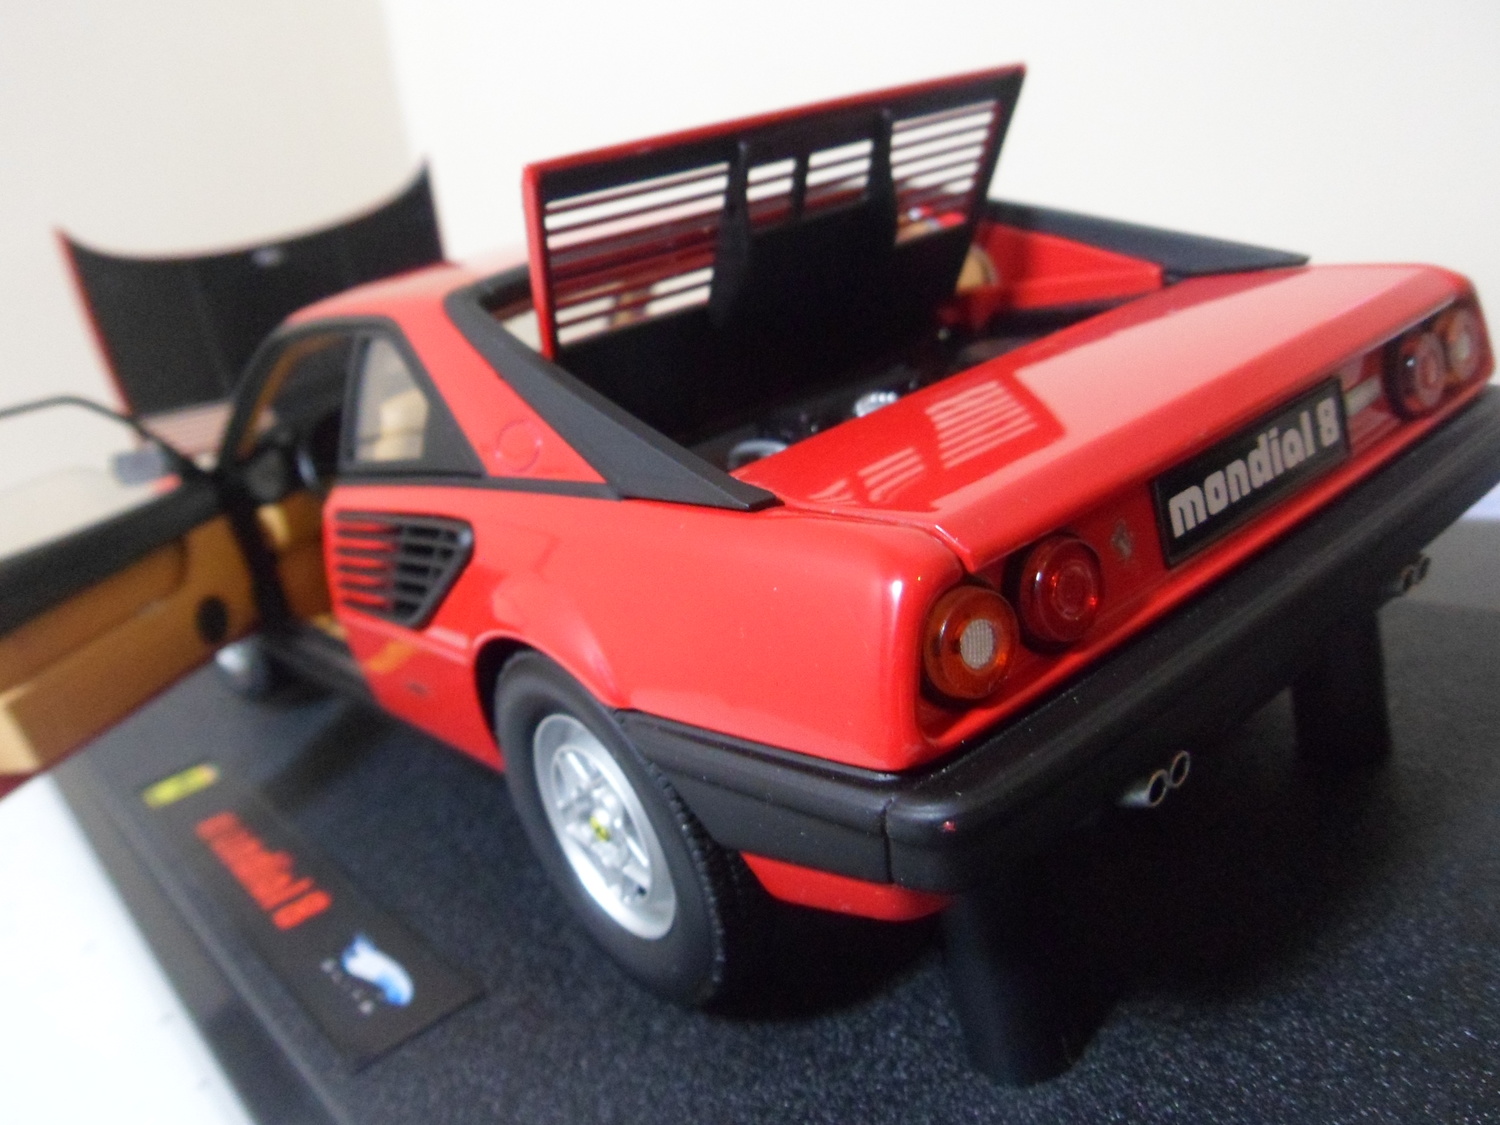 FERRARI MONDIAL 8 COUPE 60TH RELAY VERSION MATTE RED 1:18 by HOT WHEELS ELITE